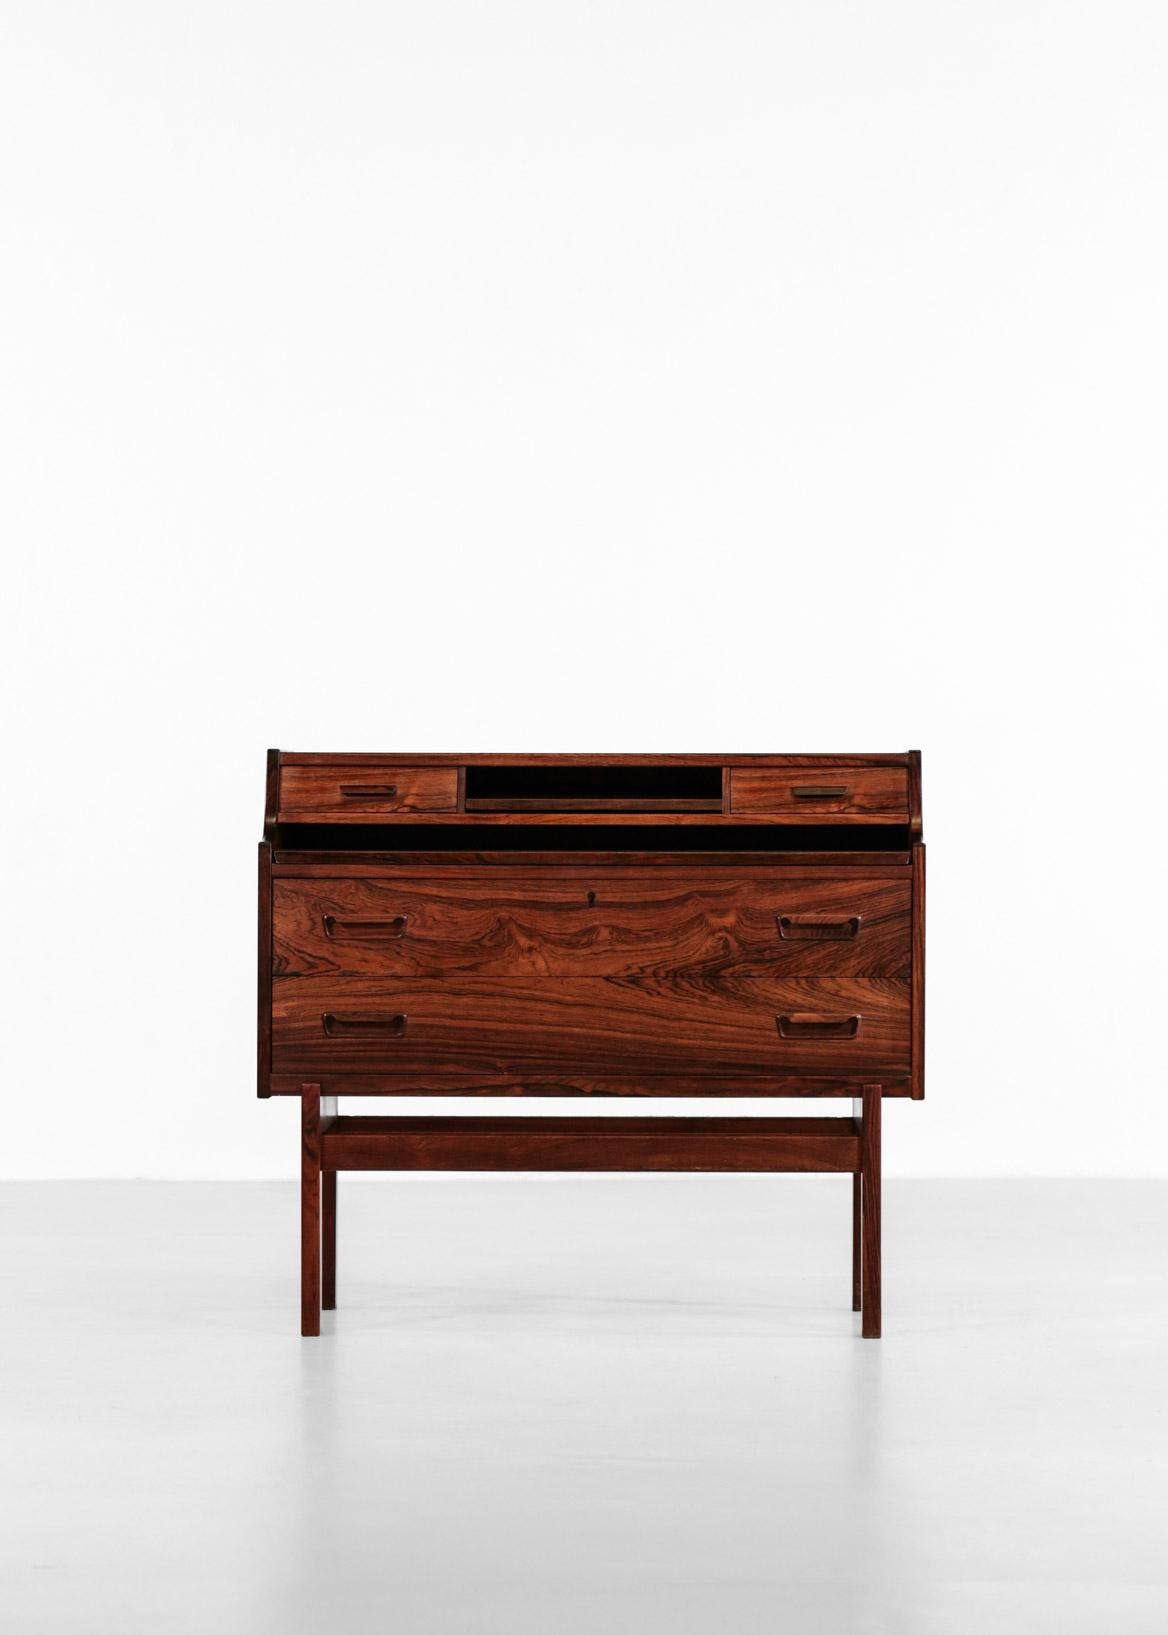 Nice commode designed by Arne Wahl Iverson, Danish designer. Made of rosewood with a mirror.